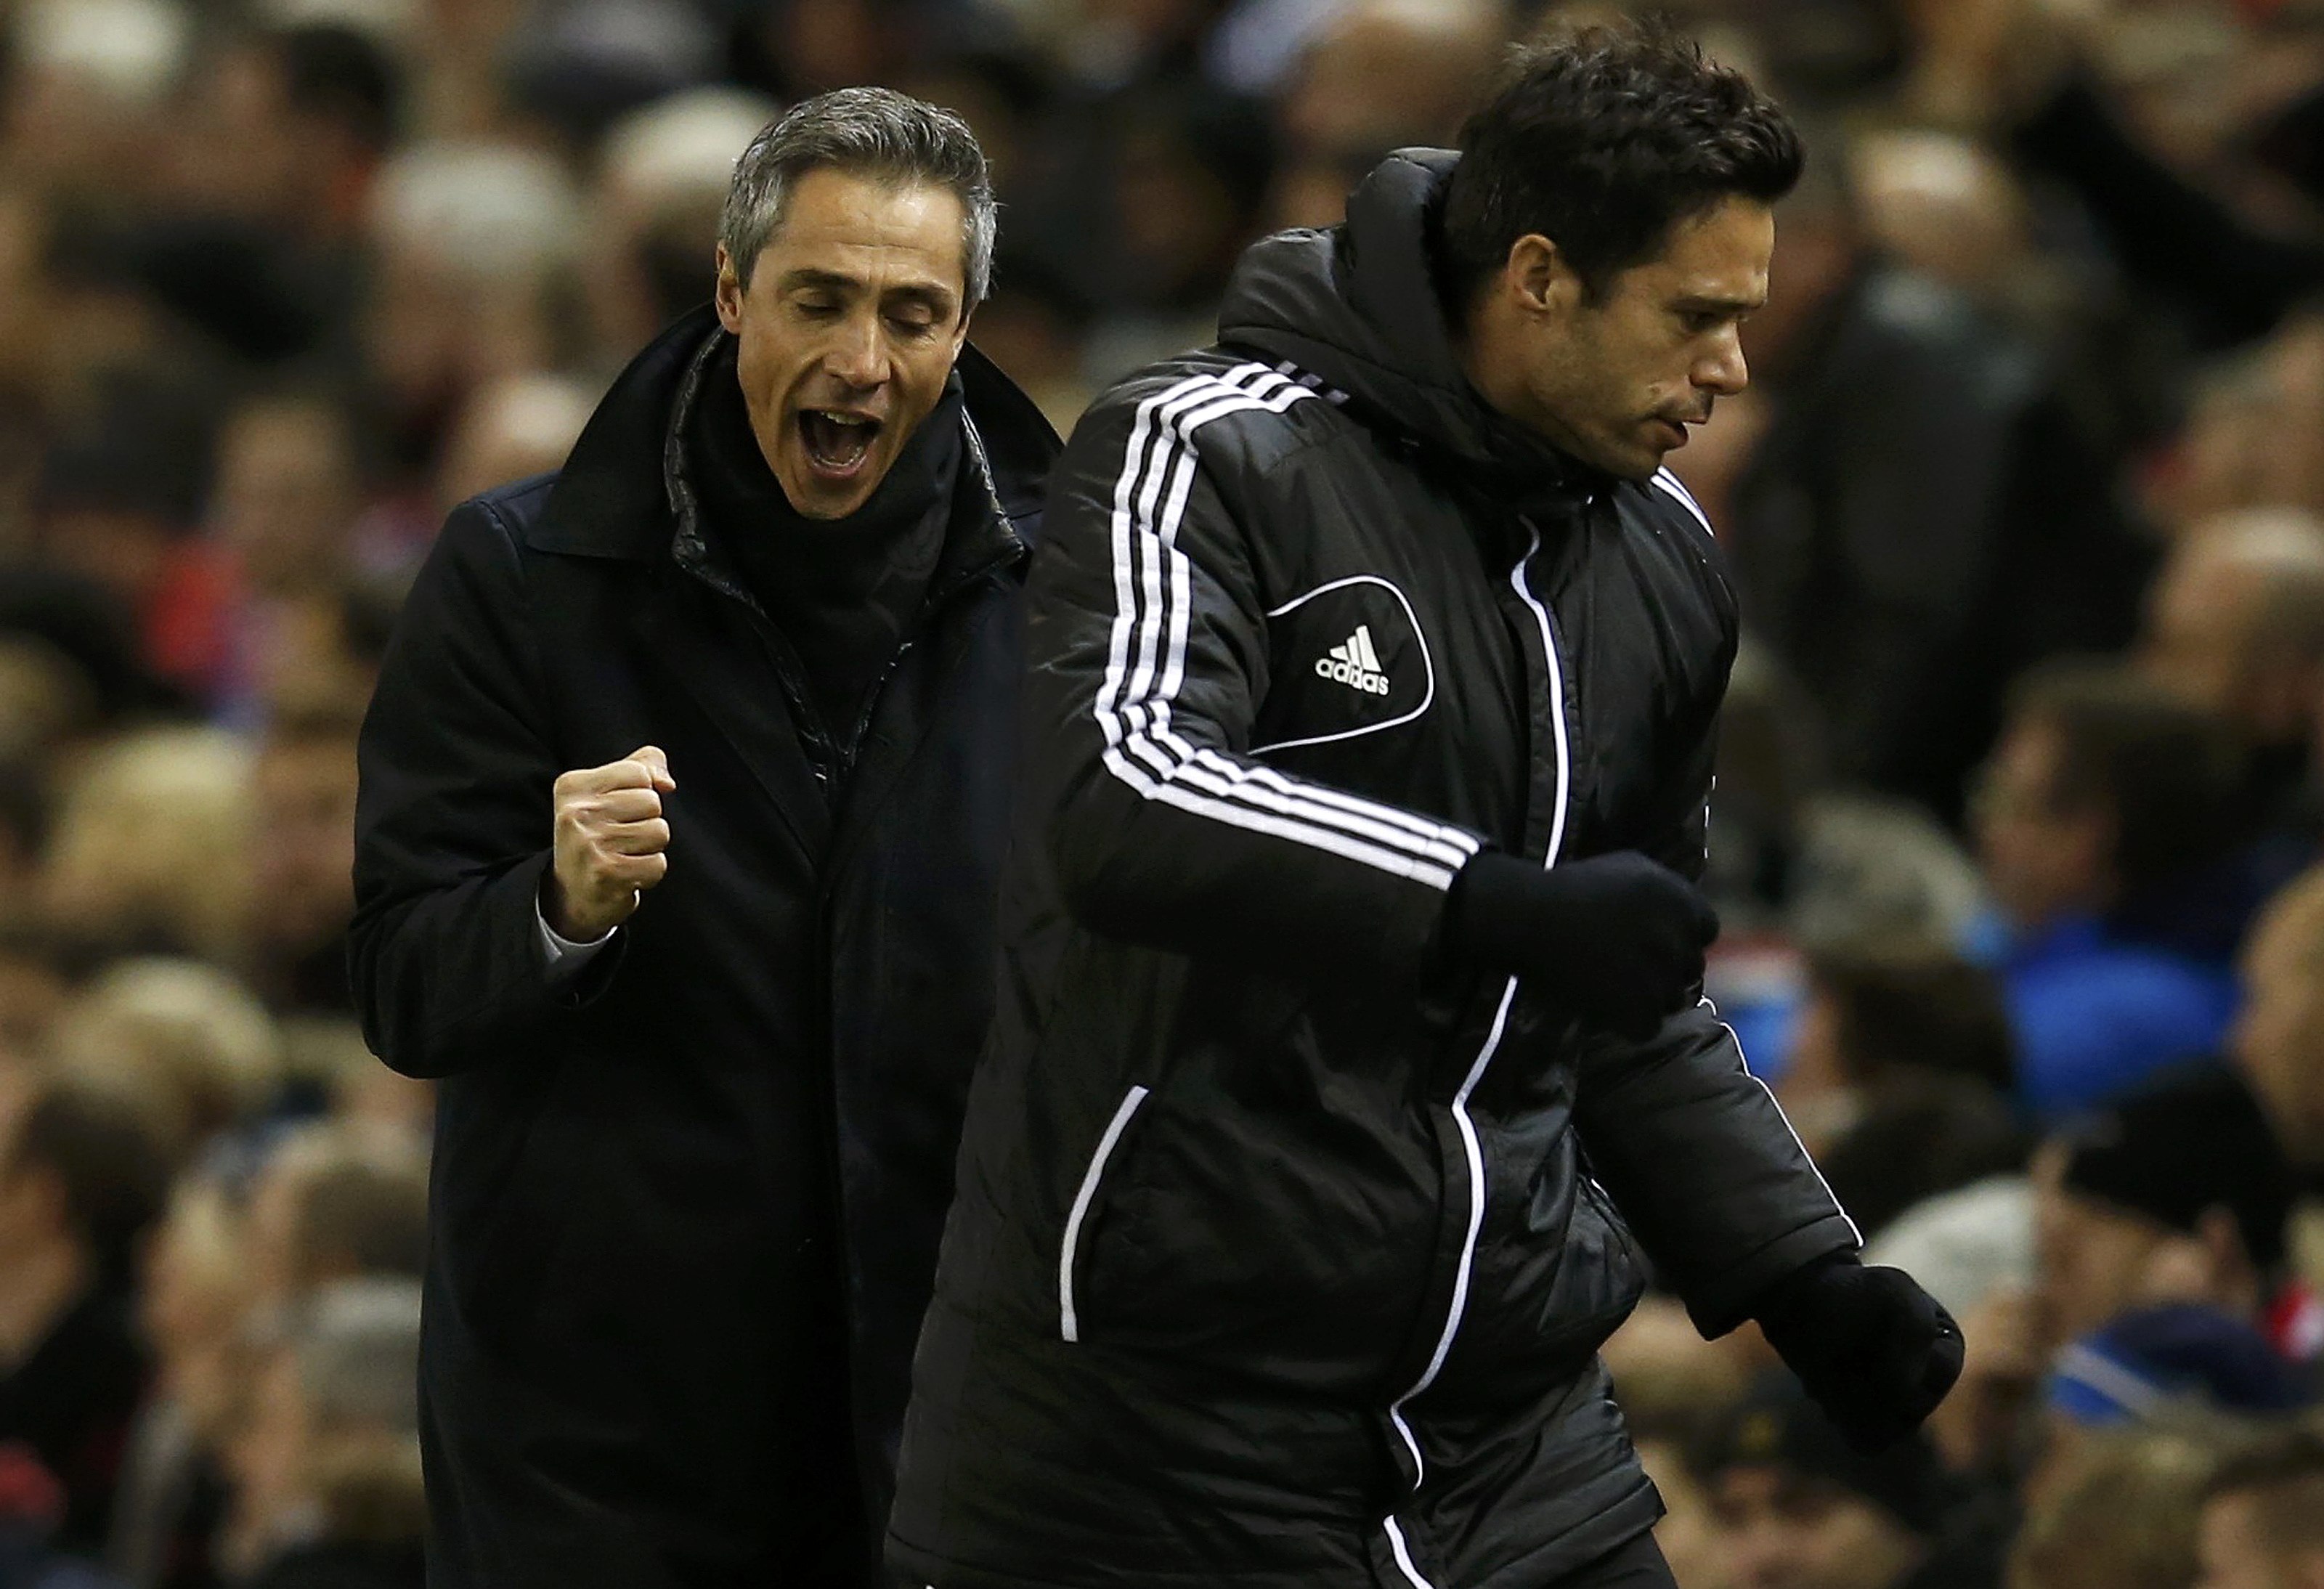 FC Basel's coach Paulo Sousa (L) celebrates his team's first goal during their Champions League Group B soccer match against Liverpool at Anfield in Liverpool, northern England, December 9, 2014. REUTERS/Phil Noble (BRITAIN - Tags: SOCCER SPORT)